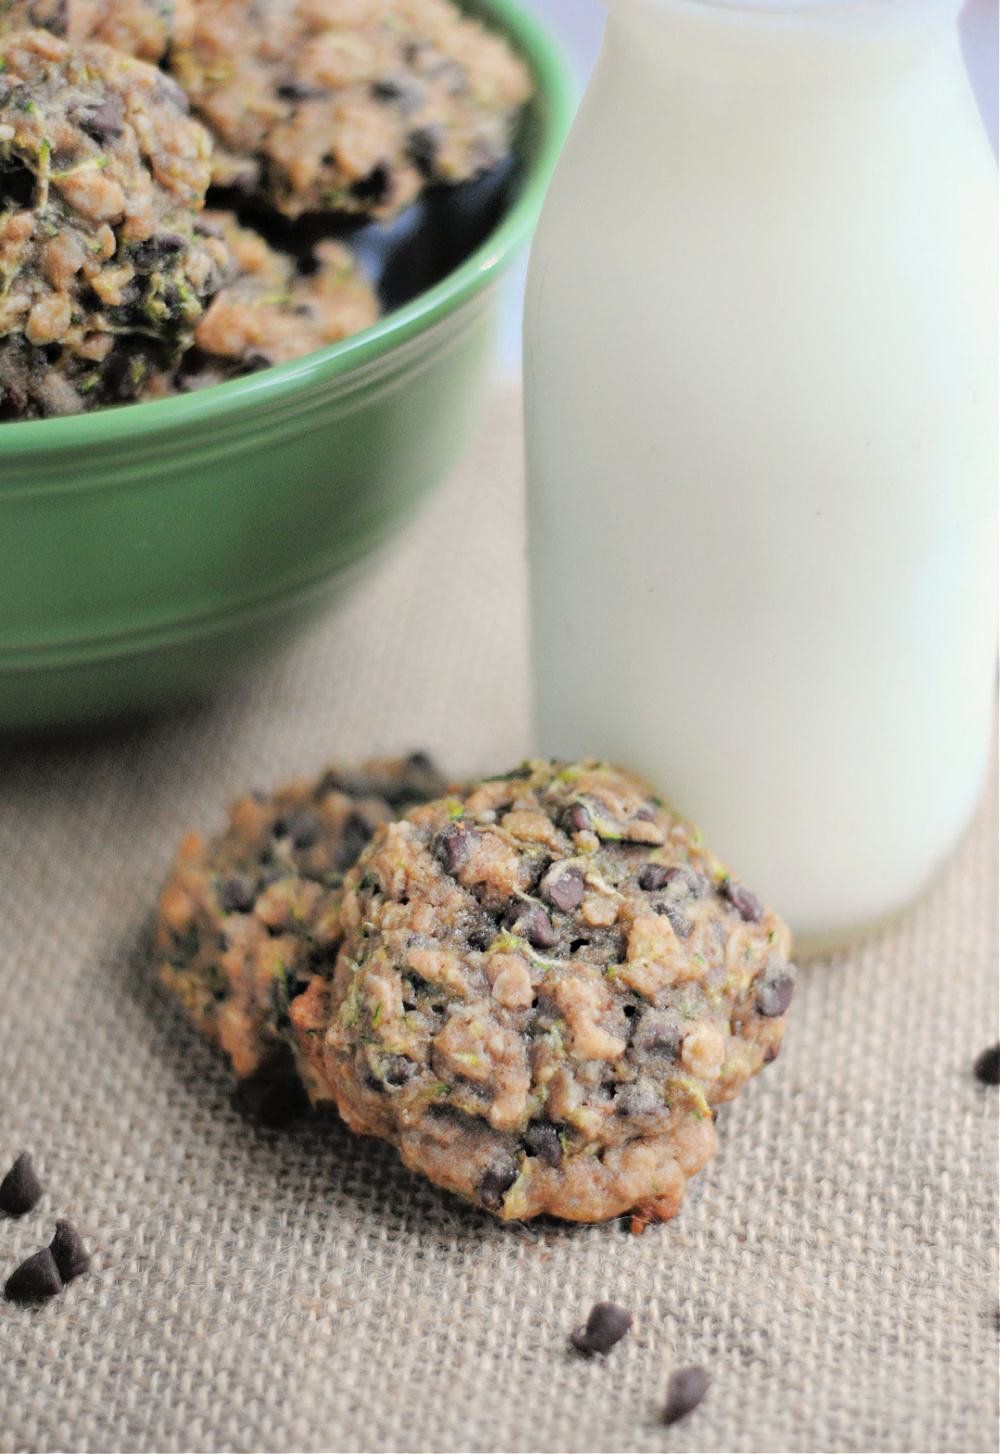 A Healthy Zucchini Chocolate Chip Cookies Recipe